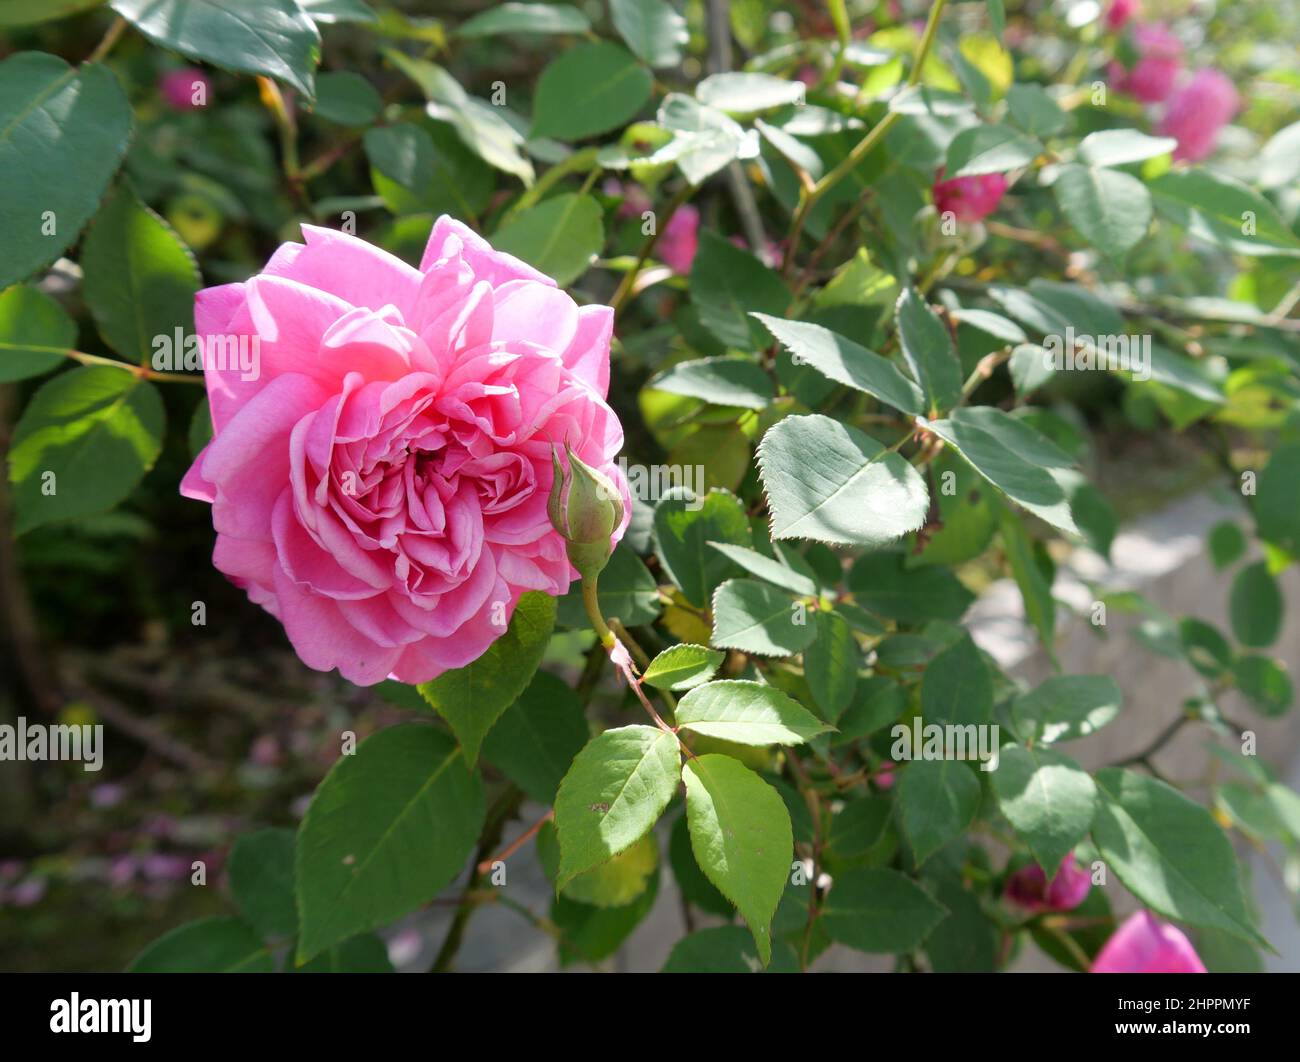 Close up of blooming pink rose and bud in garden Stock Photo